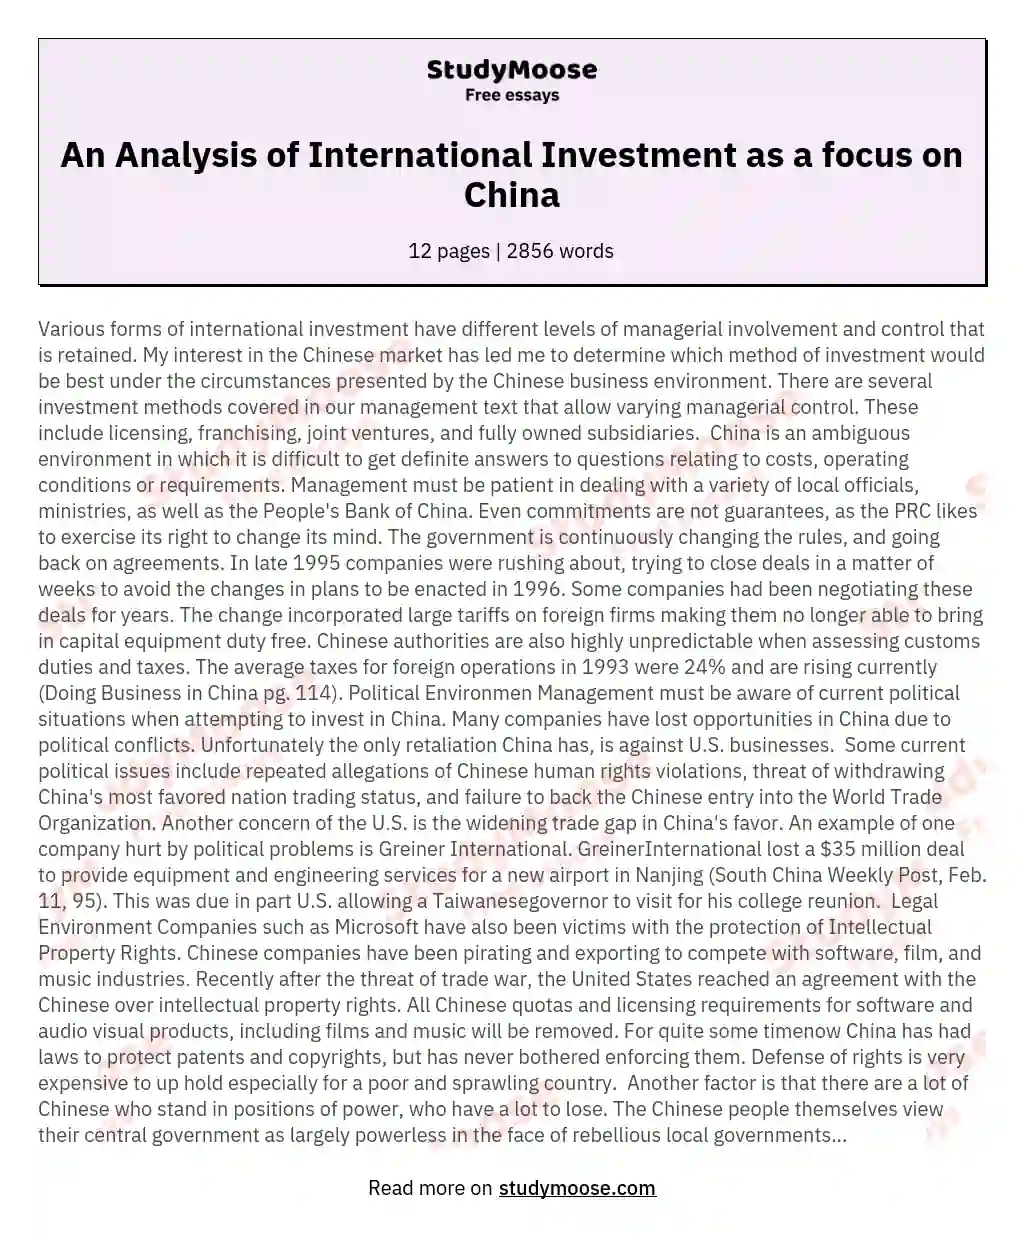 An Analysis of International Investment as a focus on China essay